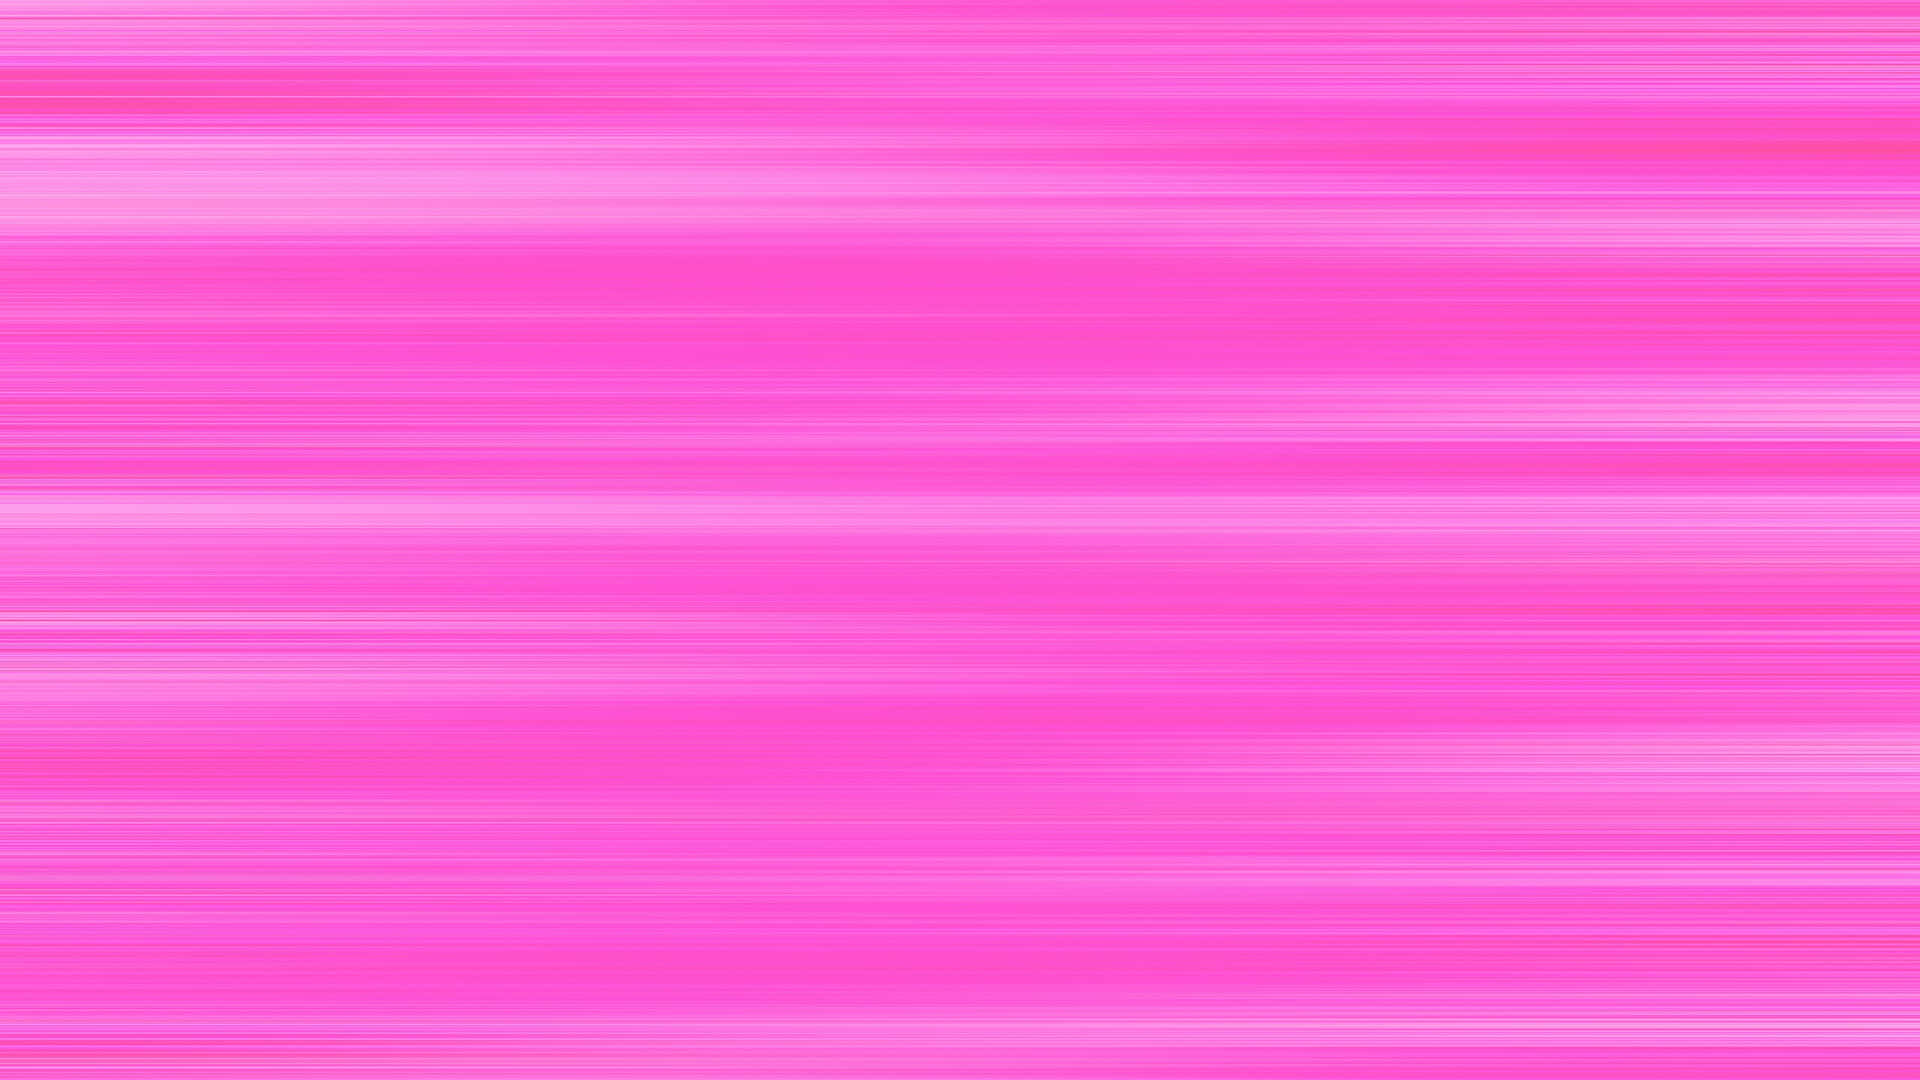 Vibrant Pink Speed Lines Background Wallpaper